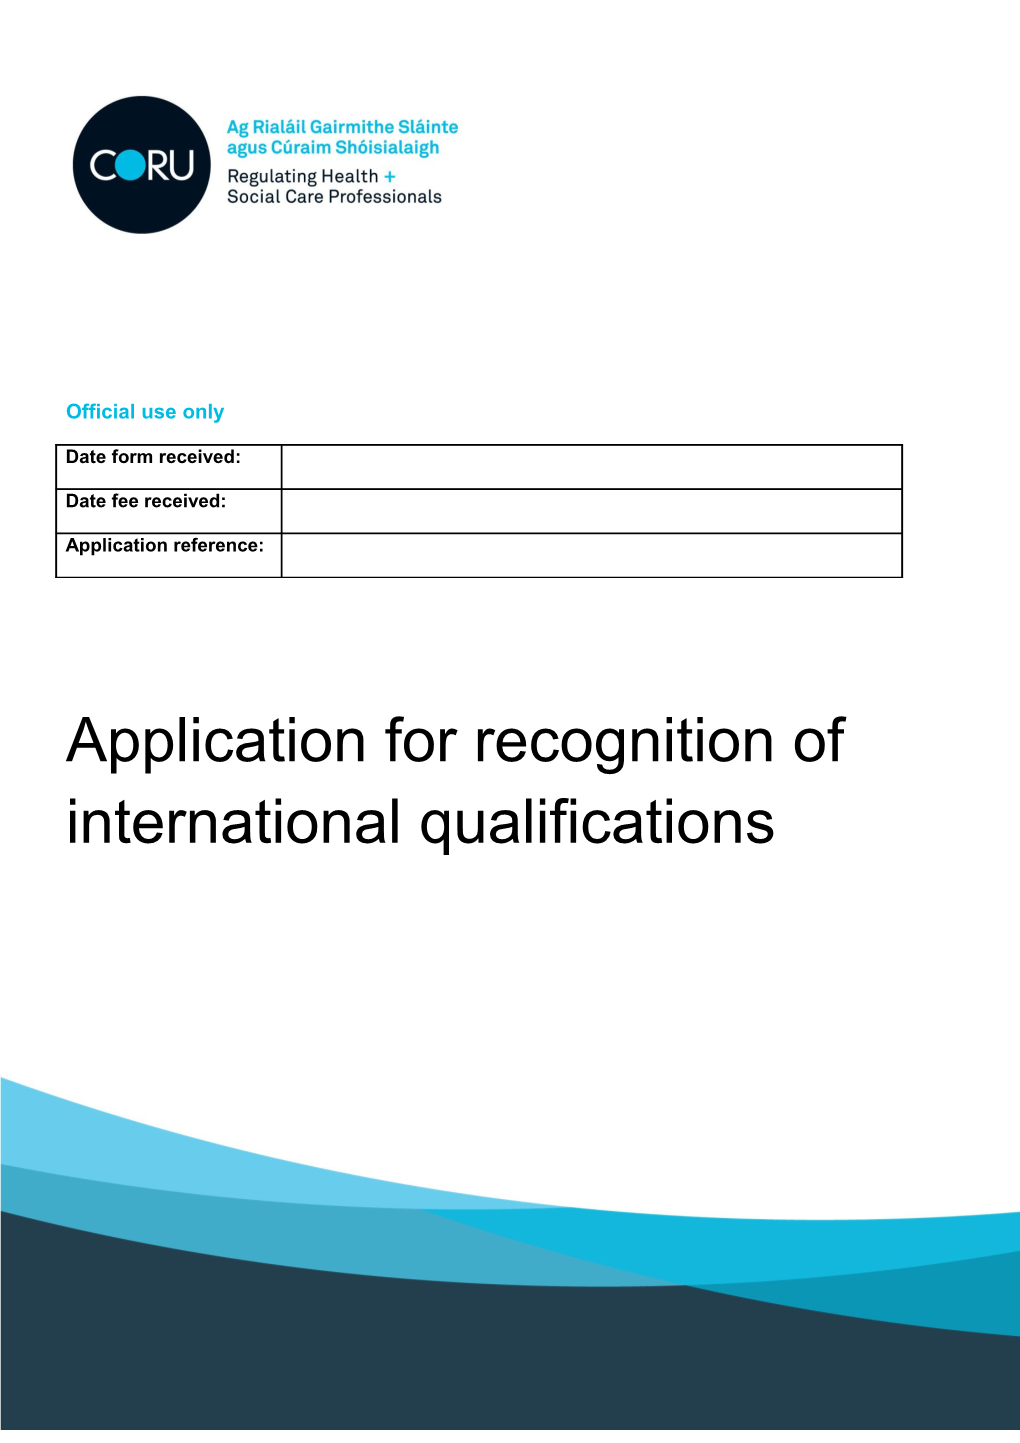 Application for Recognition of International Qualifications